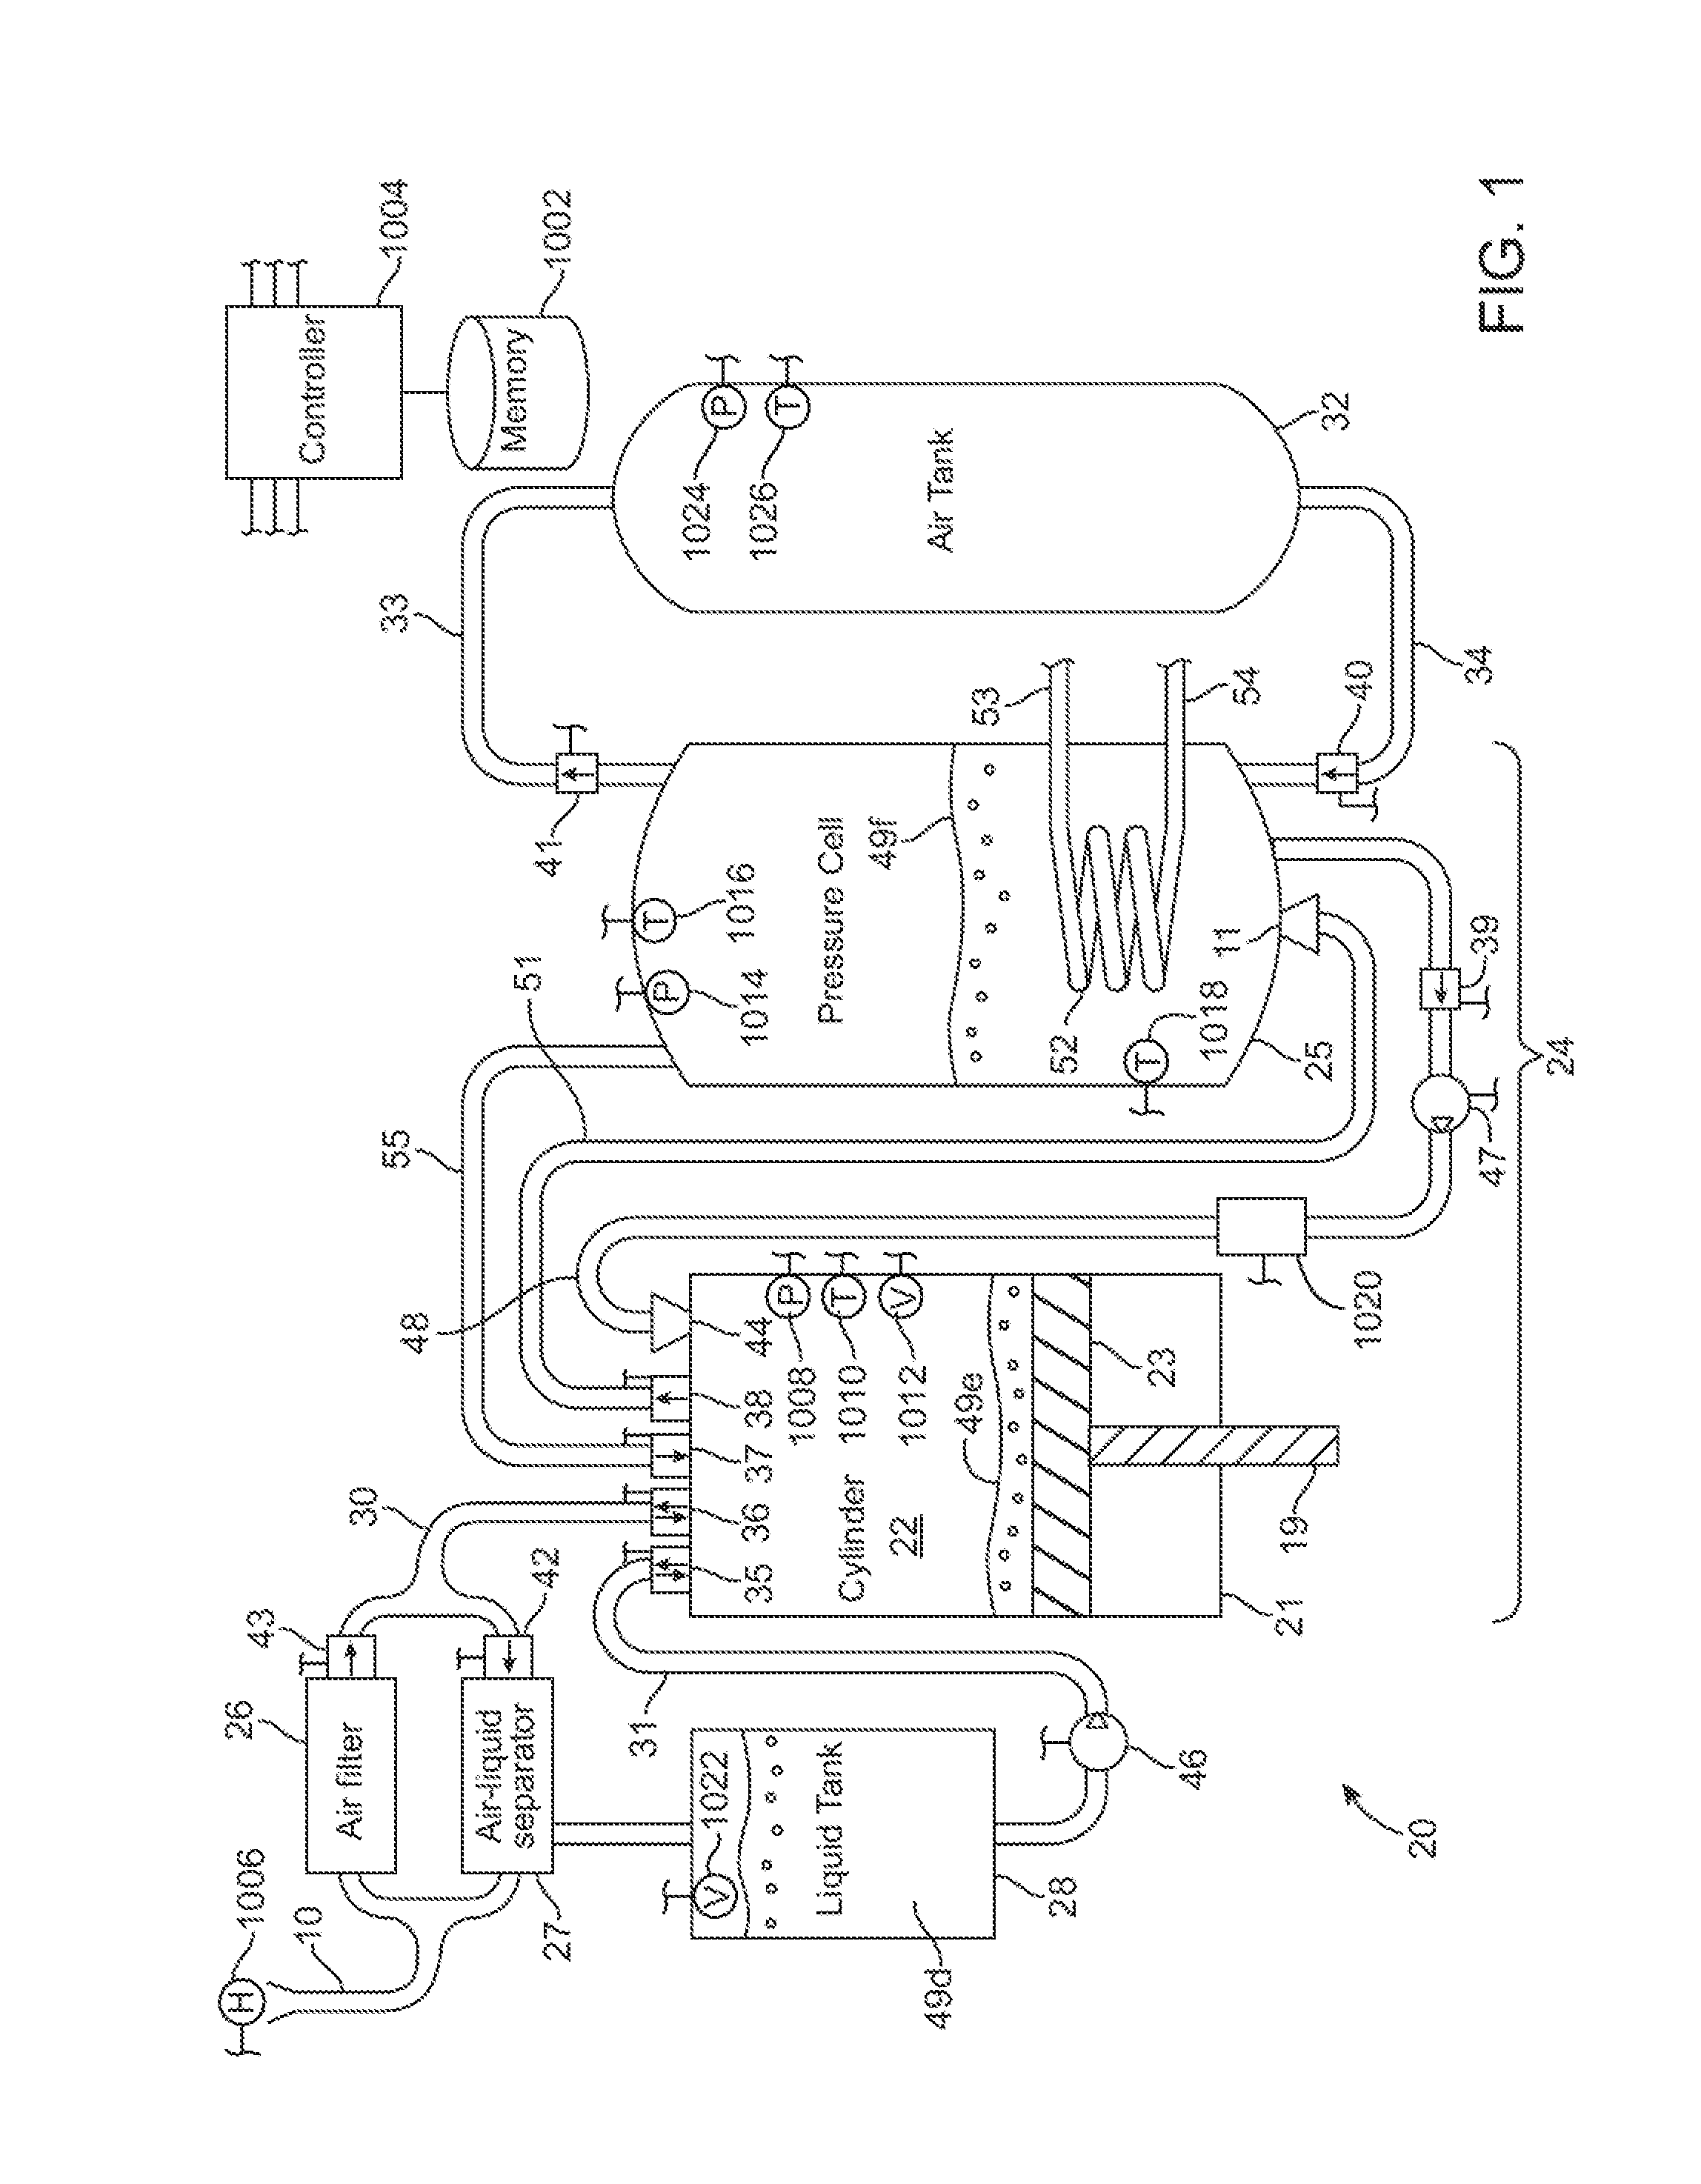 Compressed air energy storage system utilizing two-phase flow to facilitate heat exchange